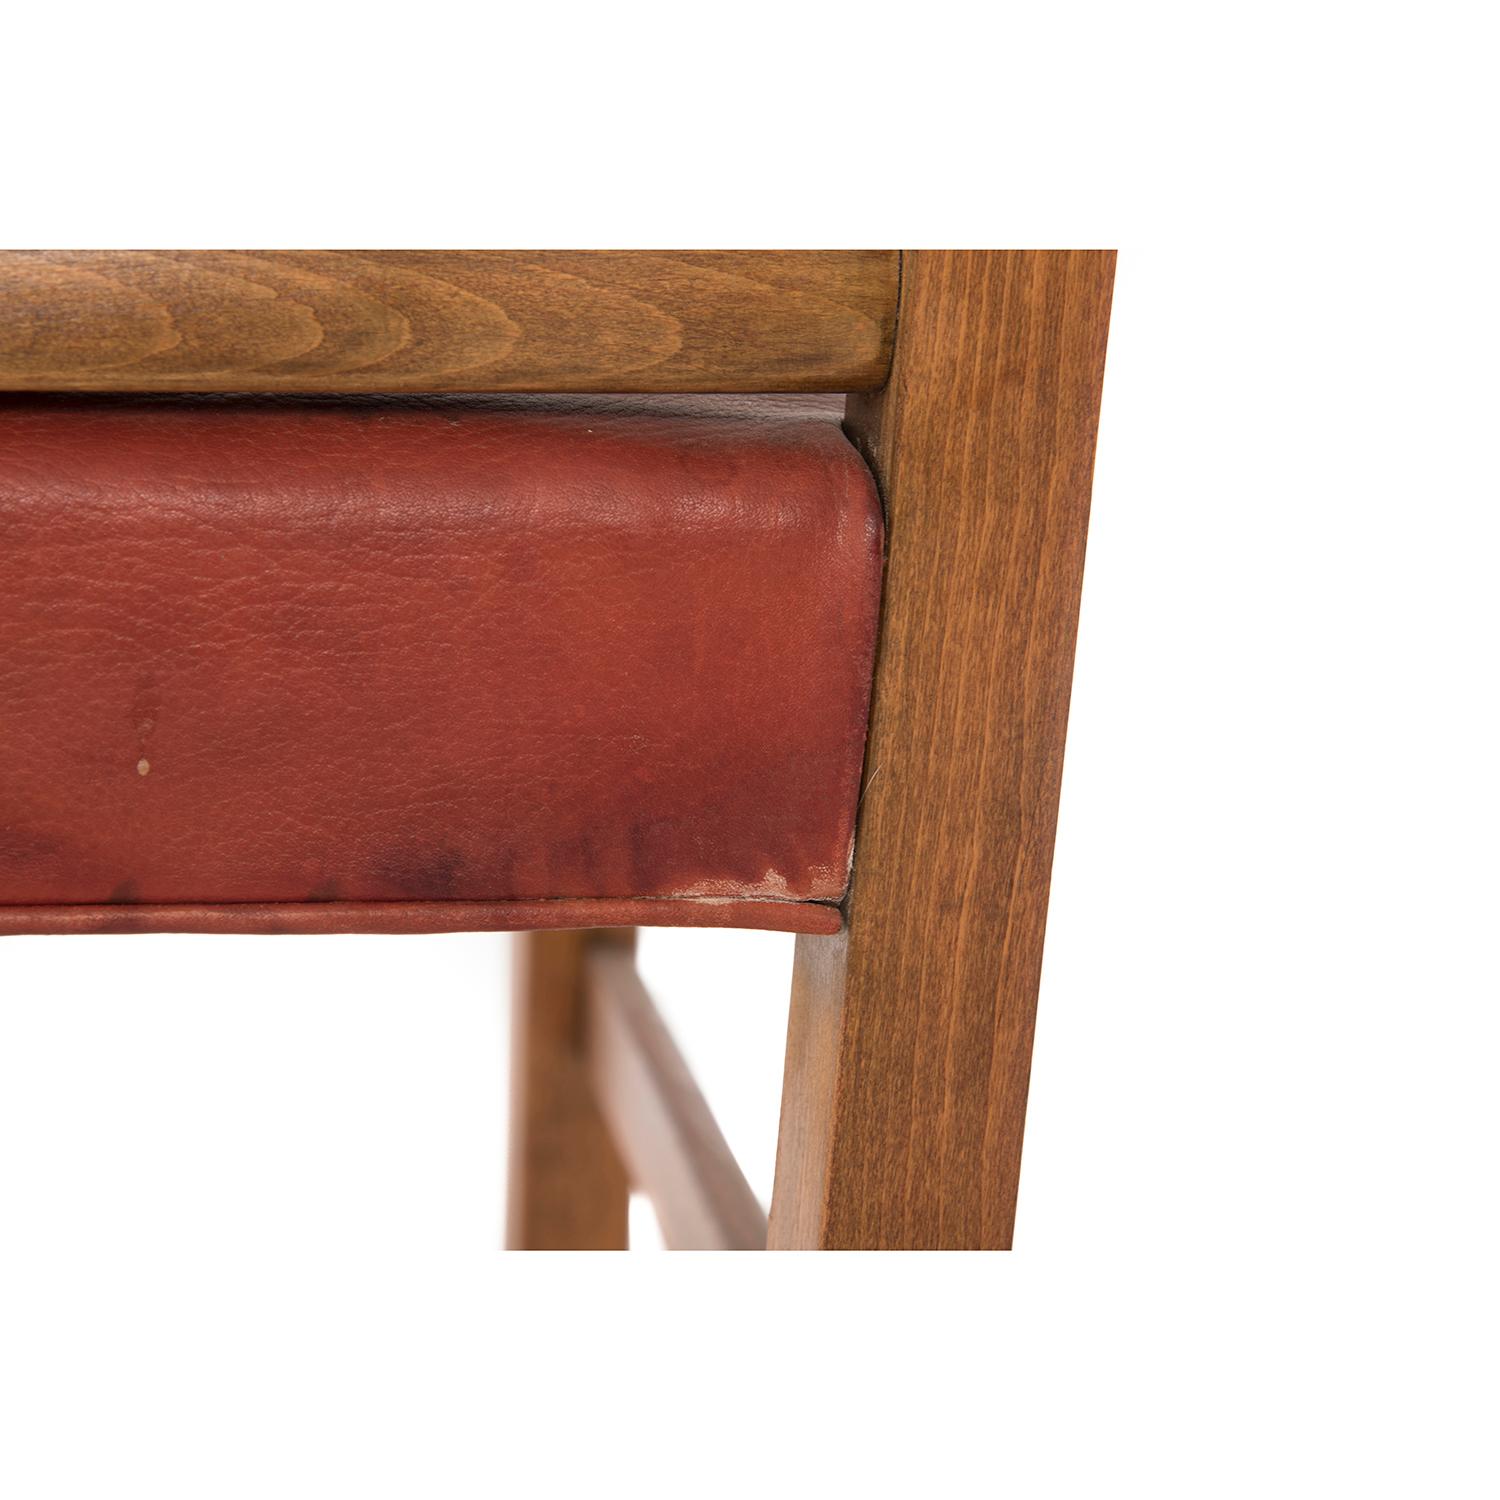 Leather Transitional Danish Modern Occasional Chair by Ole Wanscher